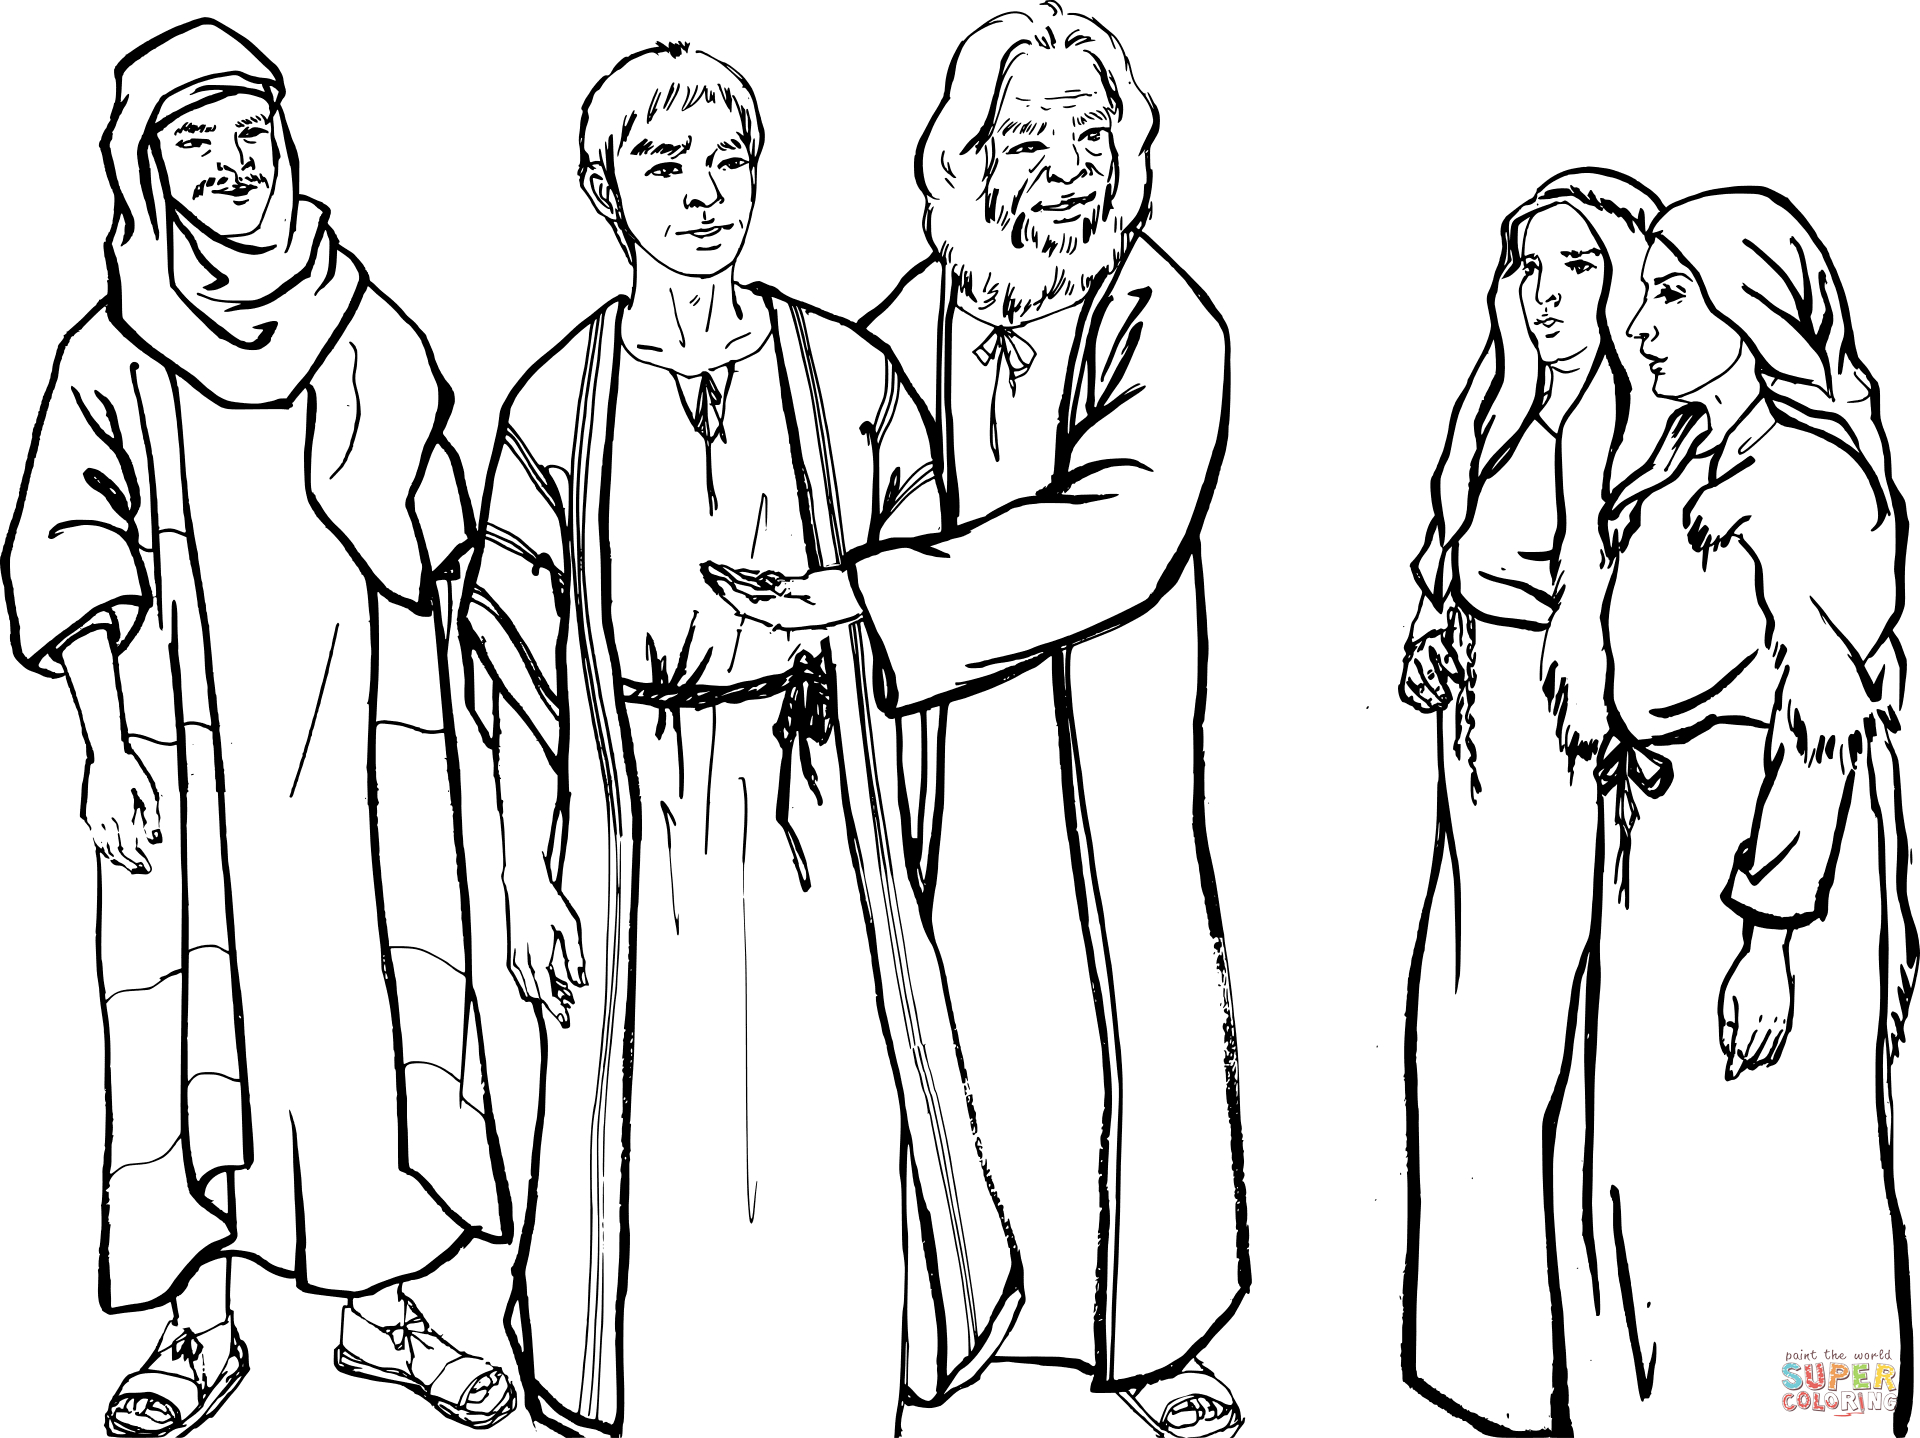 Barnabas Coloring Page Paul Raises Eutychus From The Dead Coloring Page Free Printable